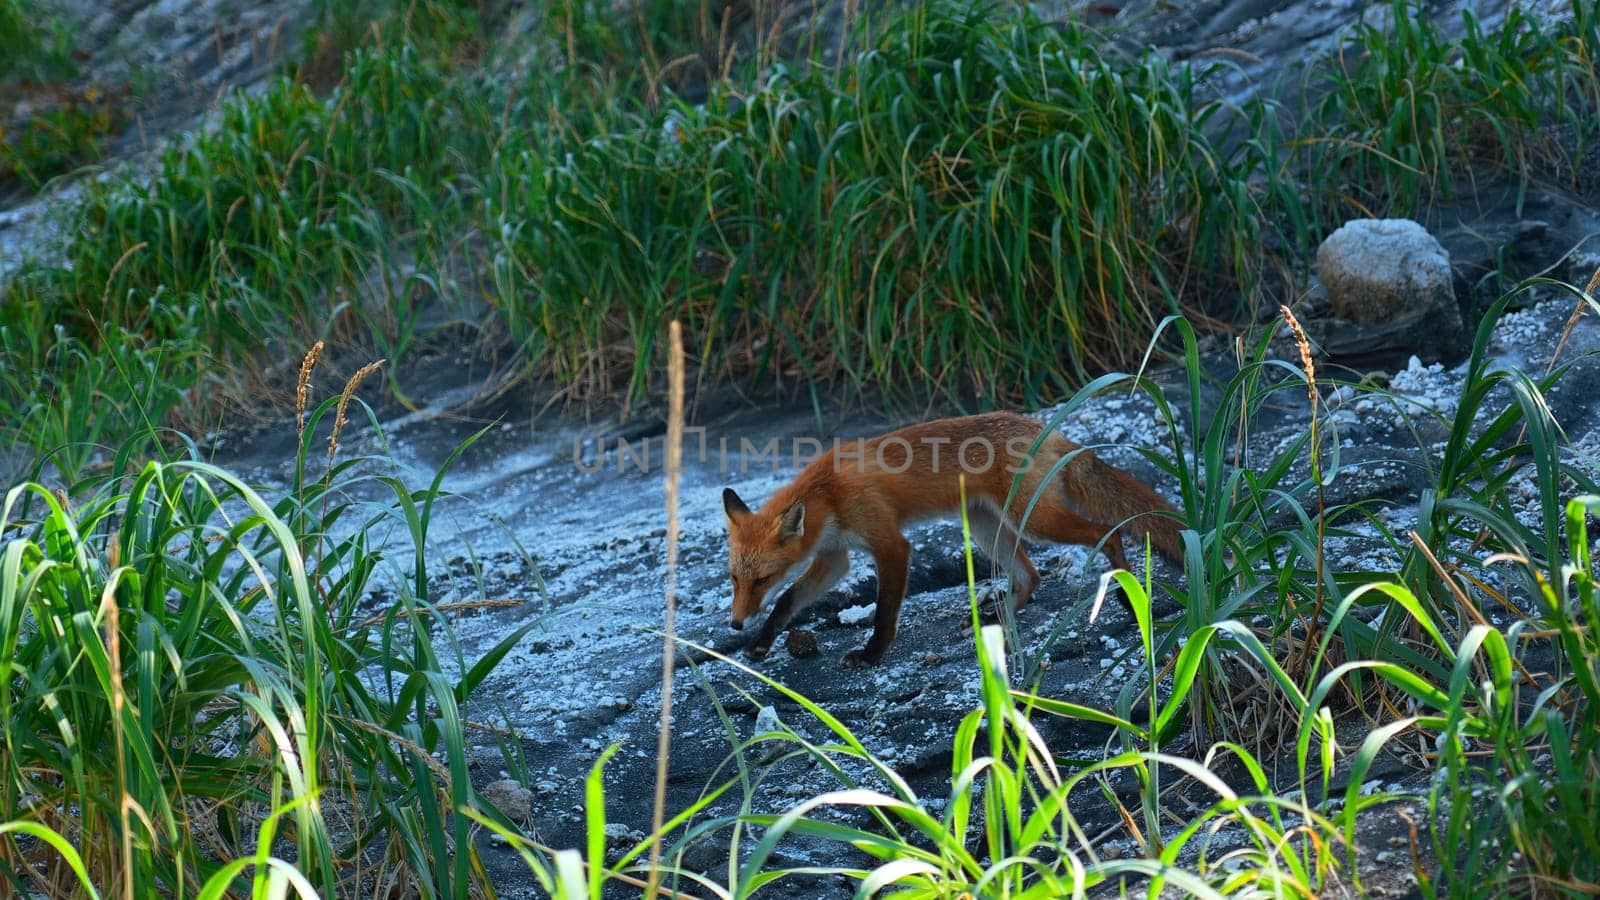 Red fox in grass. Clip. Red fox runs along stone slope with green grass. Shooting wildlife with red fox and tall green grass.